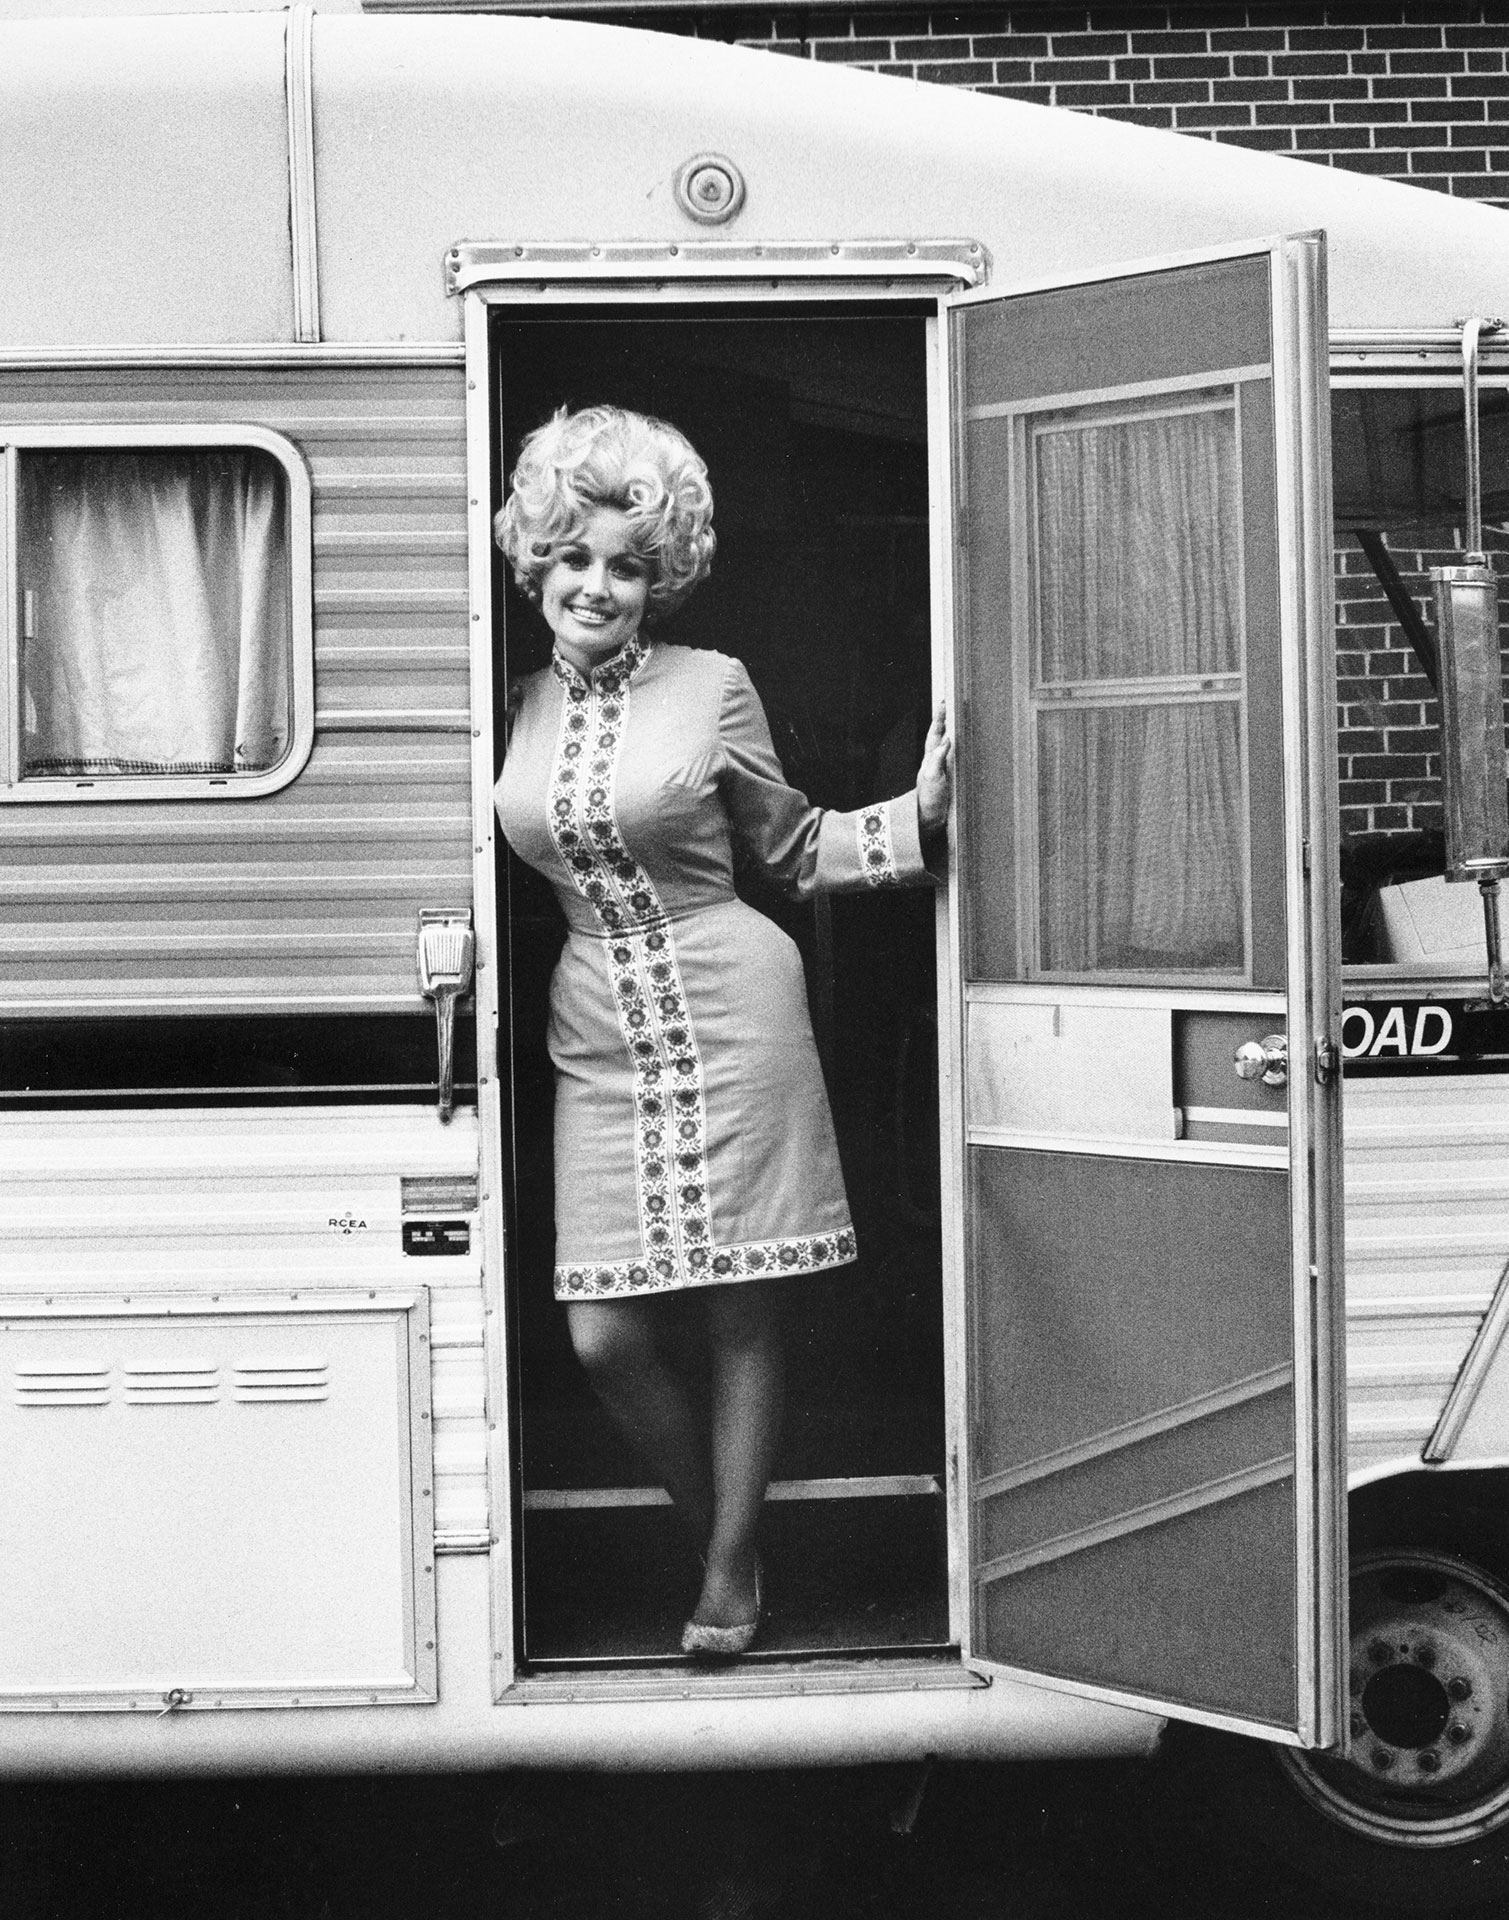 Dolly in the door of the Porter Wagoner tour bus in the 1960s (photo courtesy of Dolly Parton)